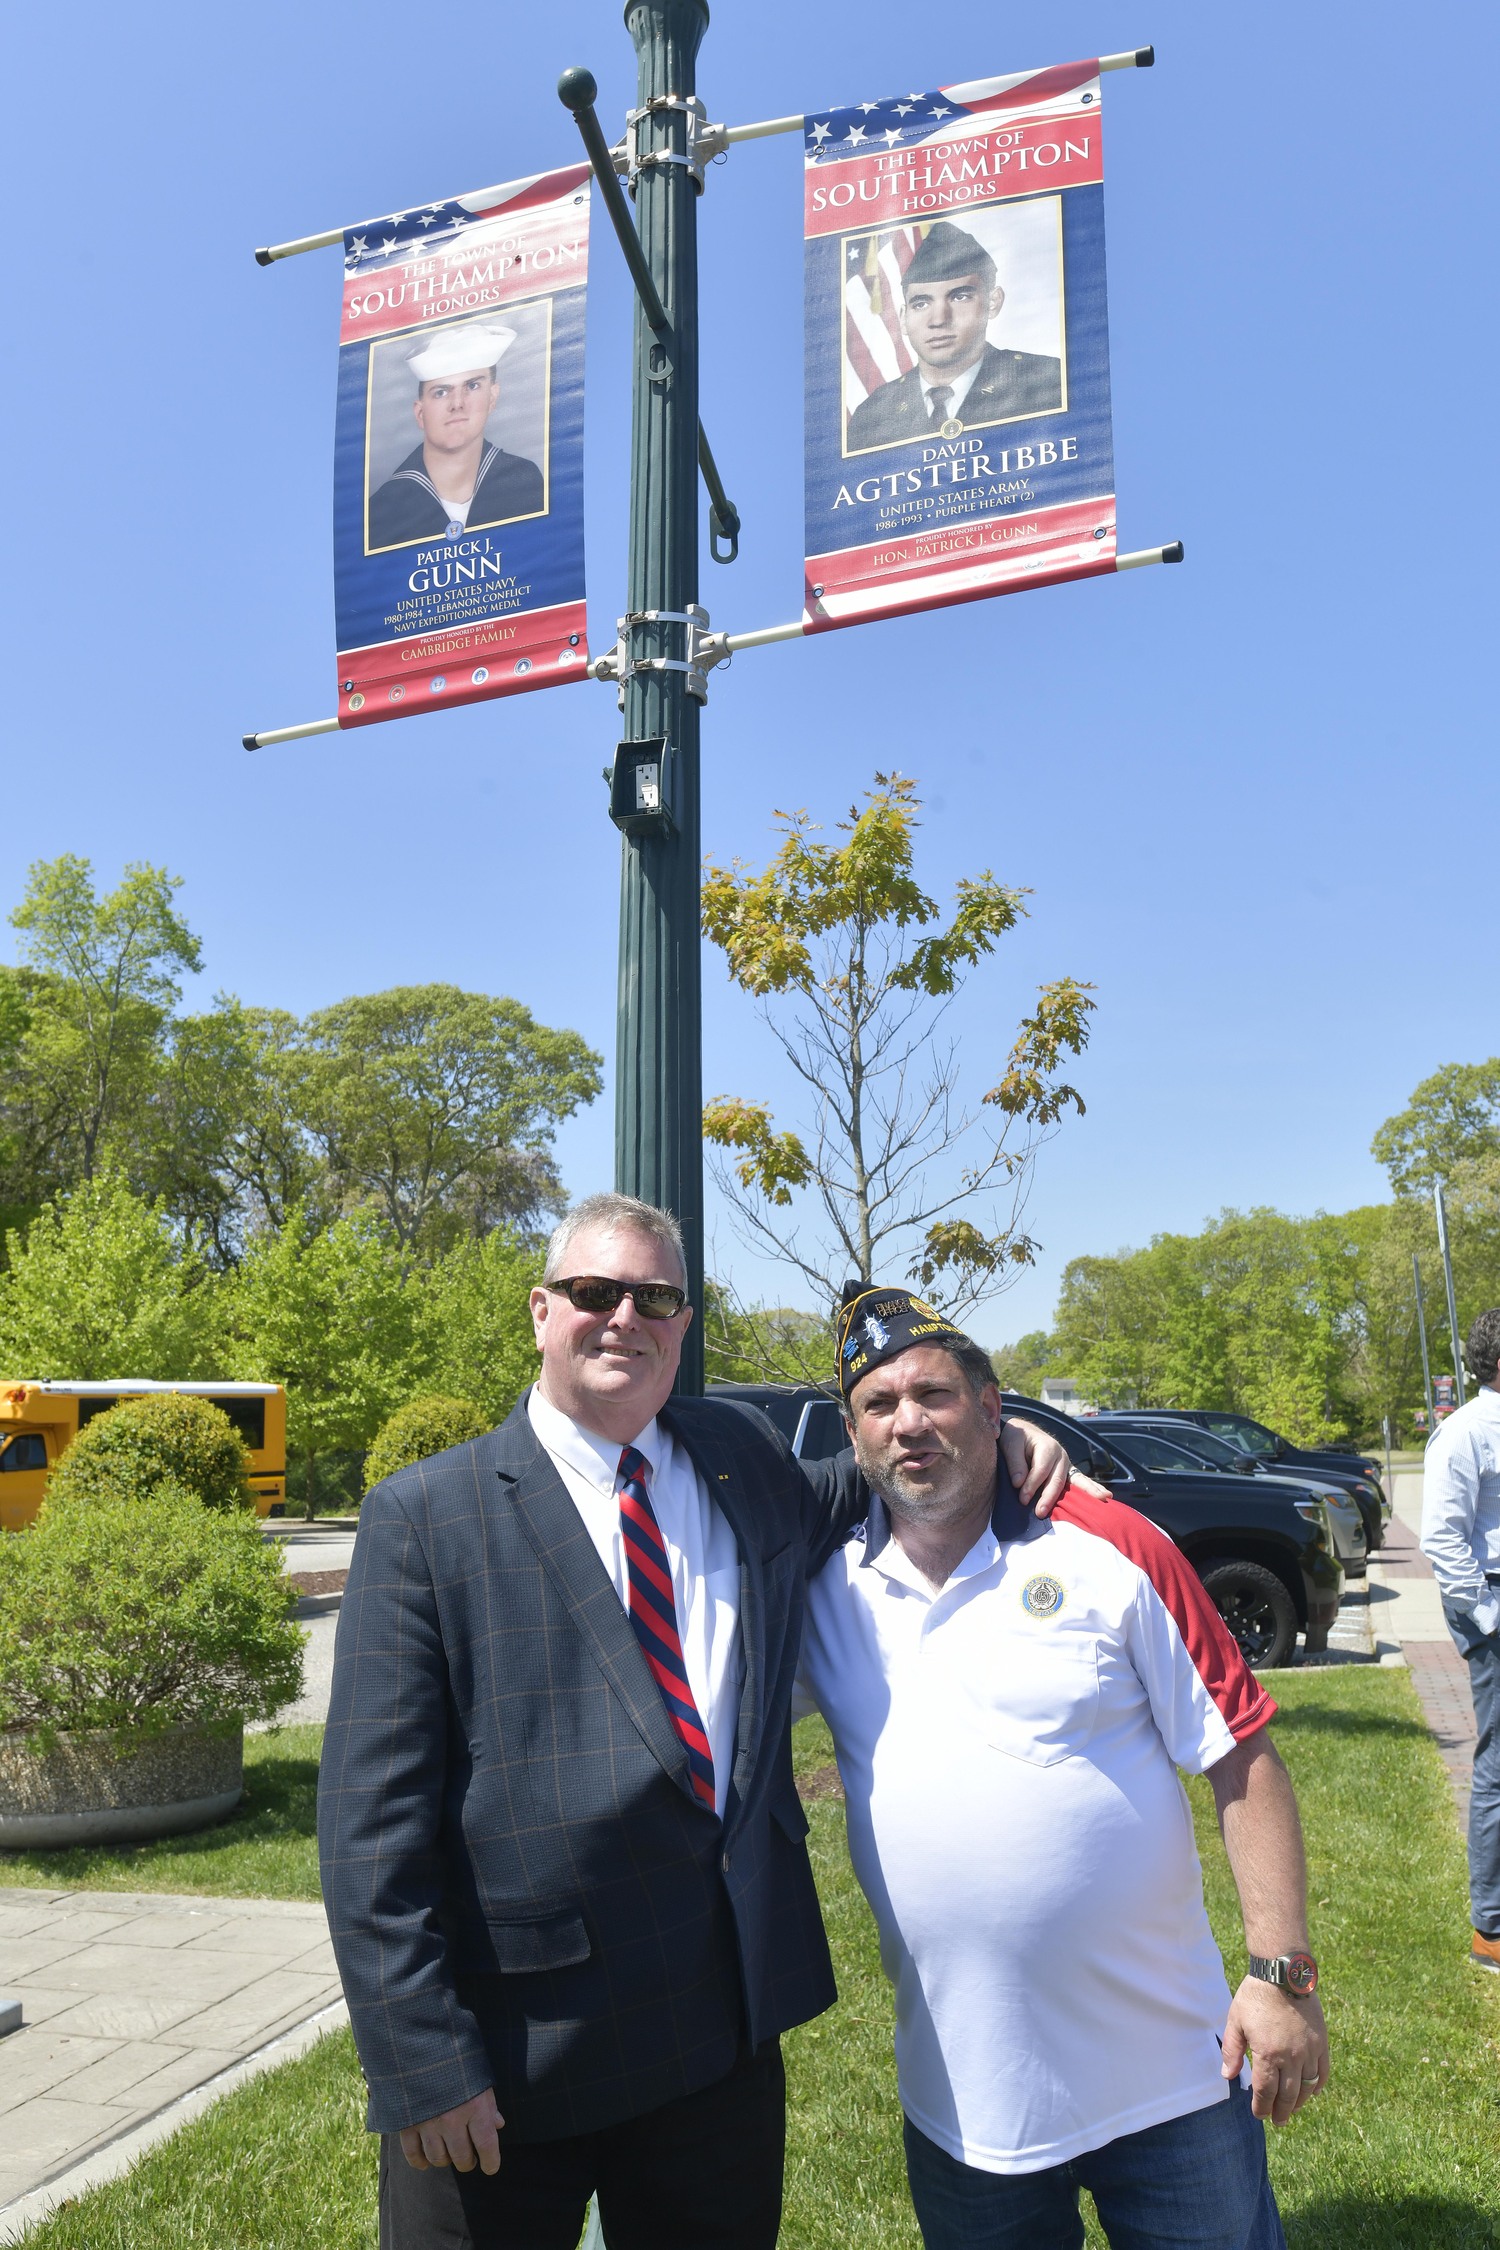 Southampton Town Justice Pat Gunn and David Agsteribbe of the Hampton Bays American Legion with their banners.  DANA SHAW